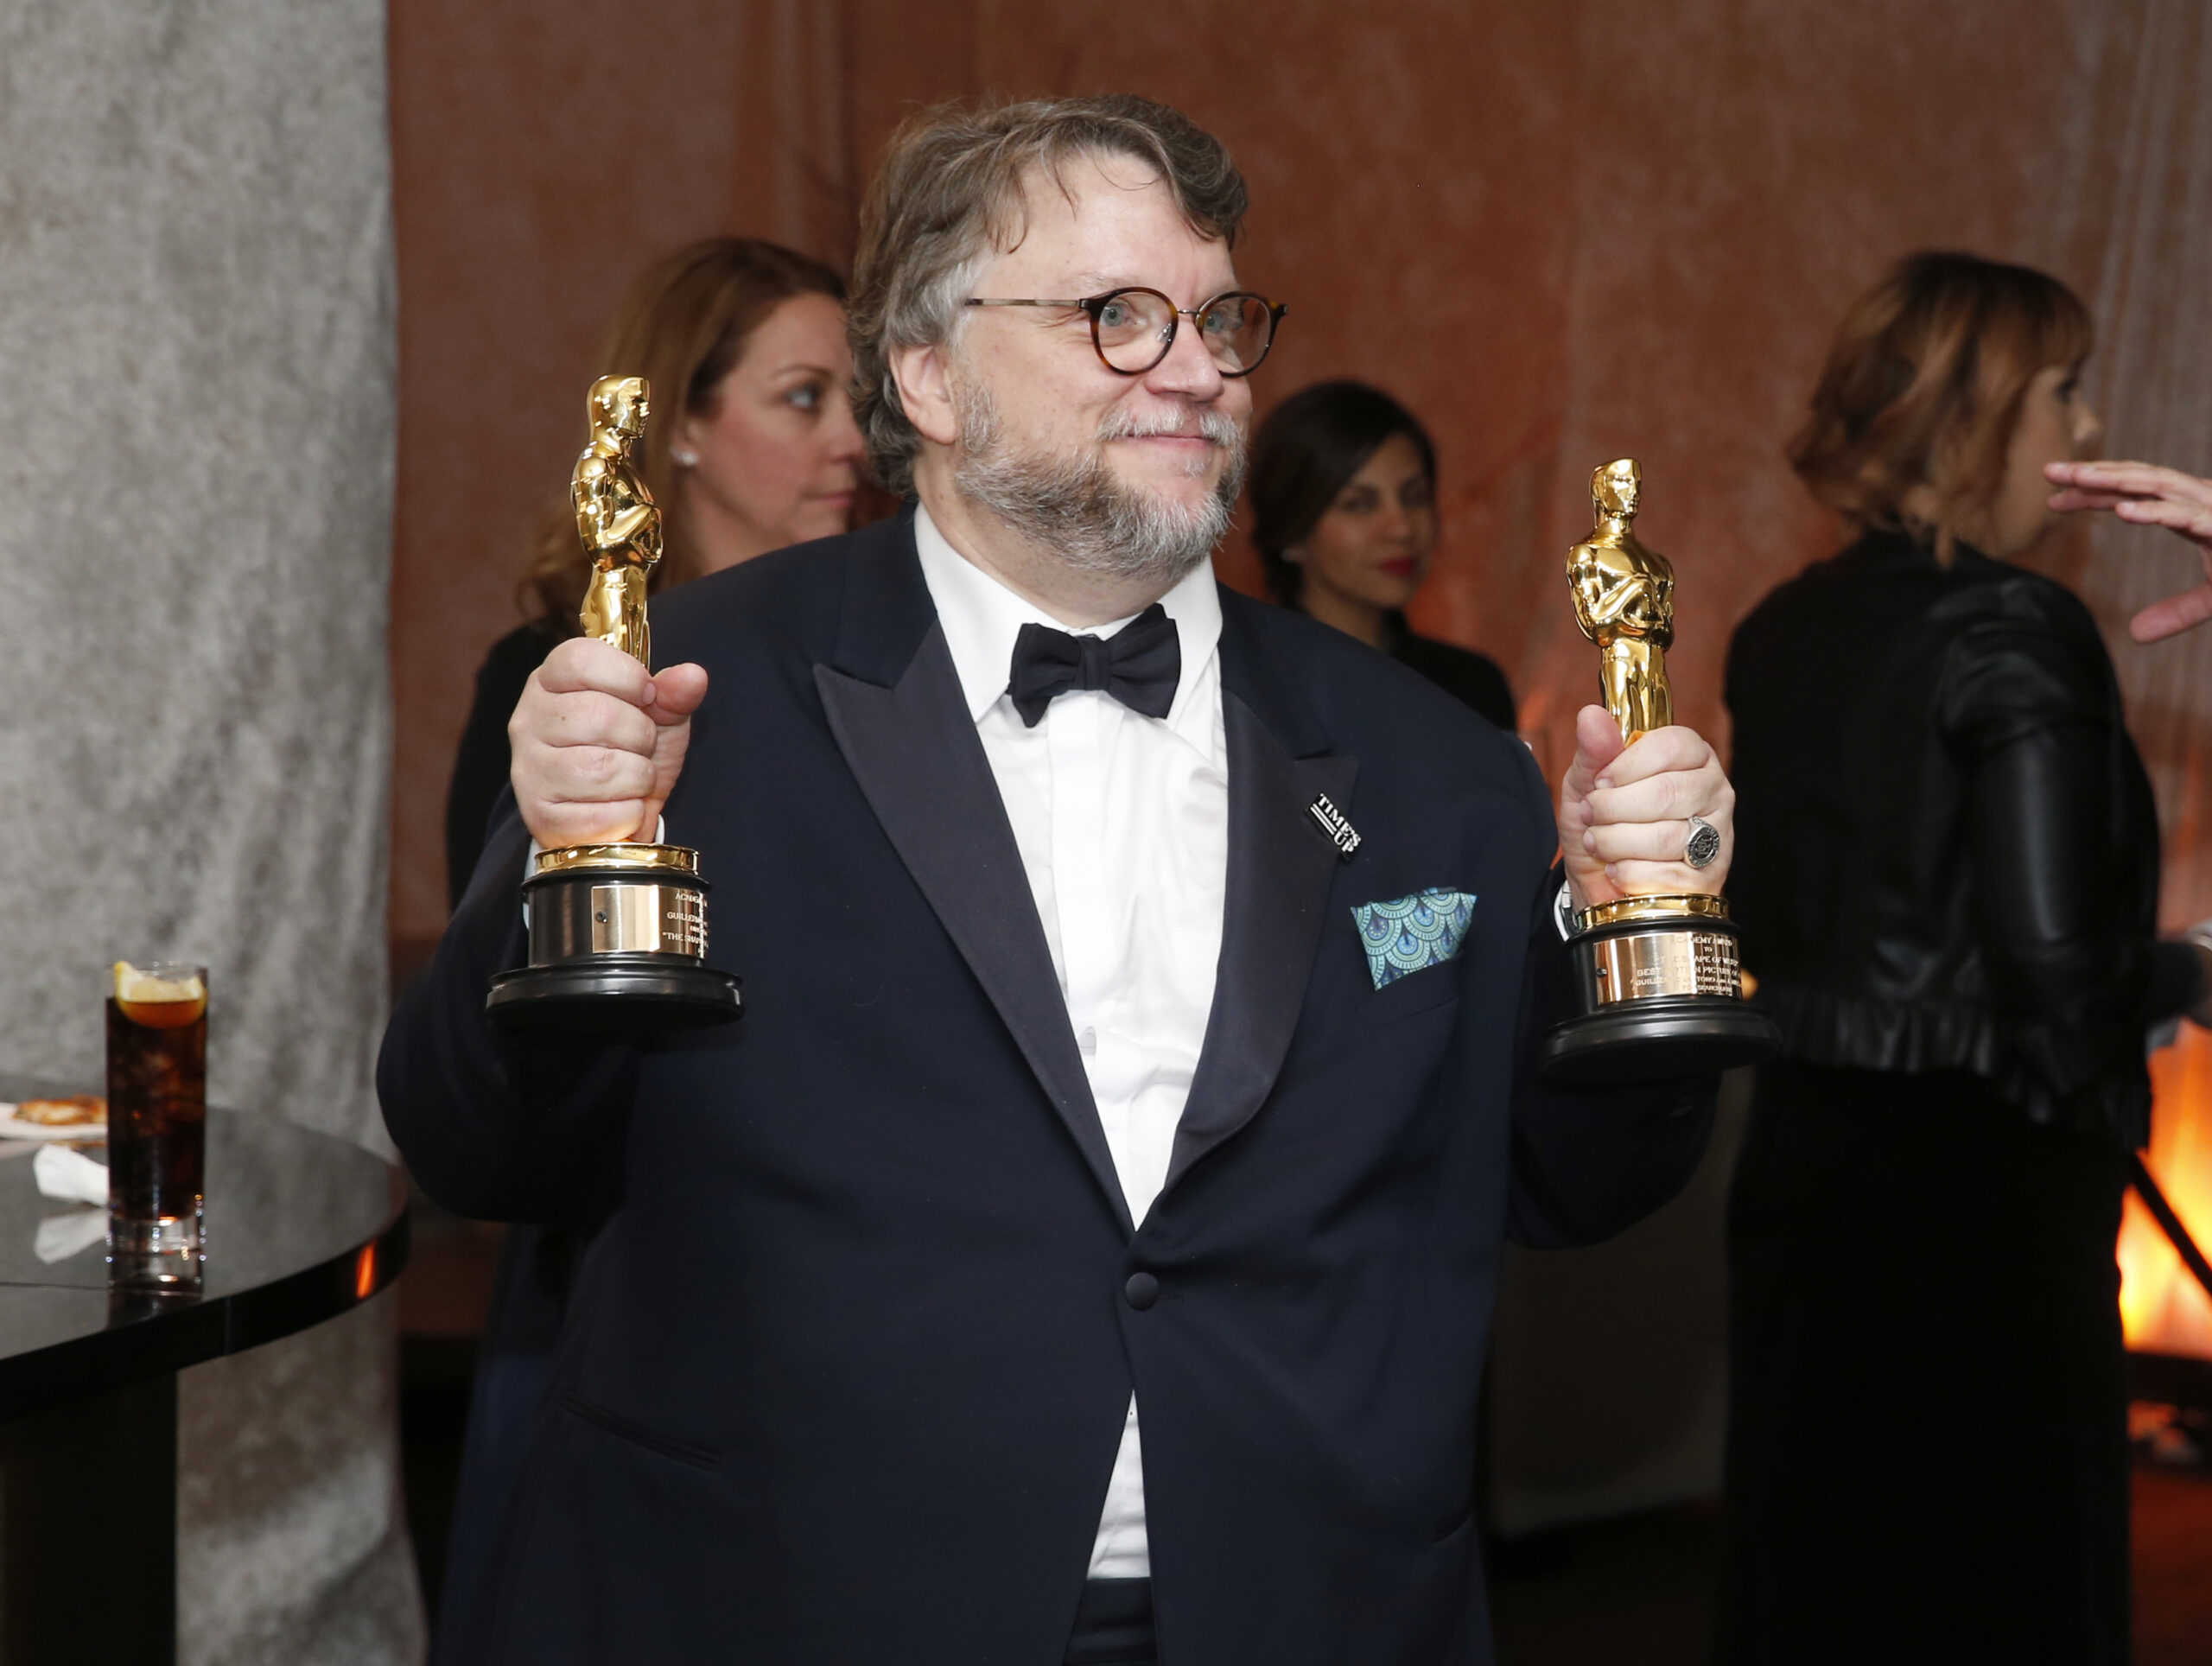 Guillermo del Toro poses holding an Academy Award in each hand